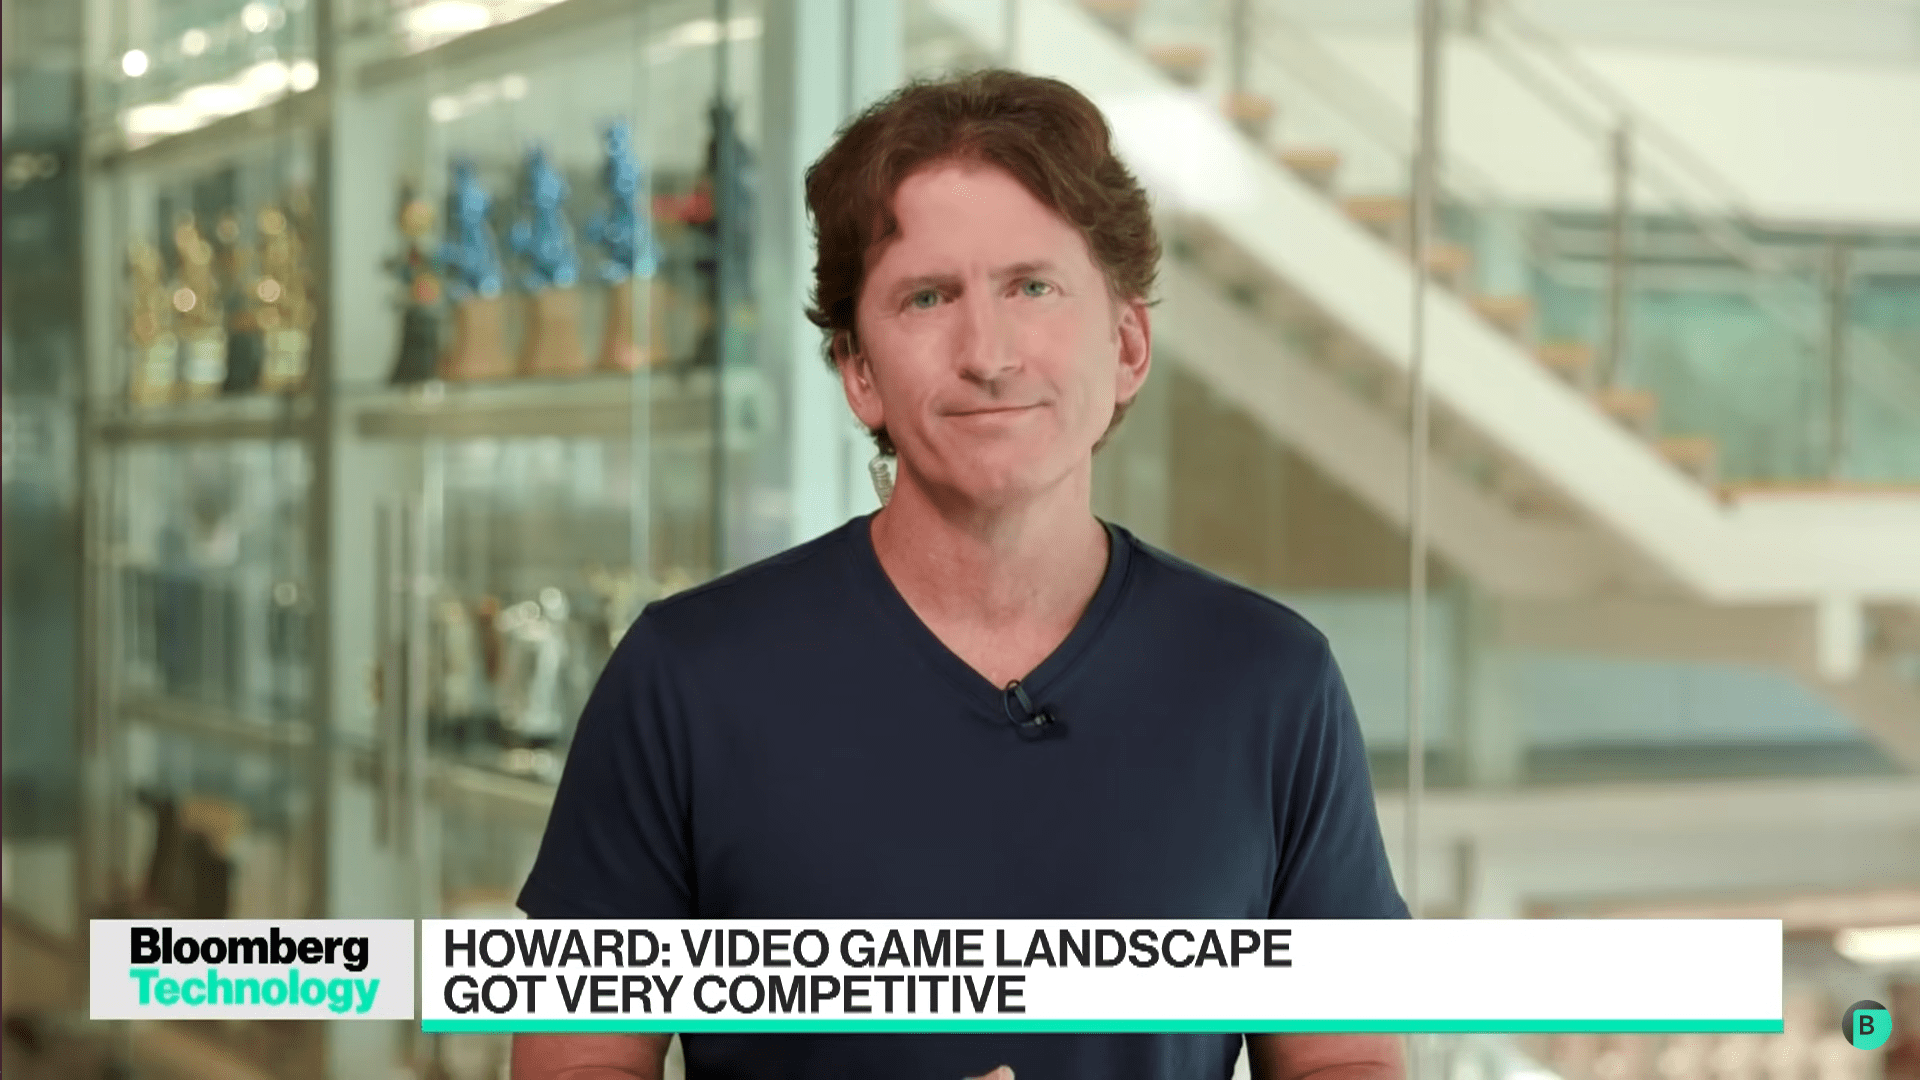 Todd Howard Pisses Off The Gaming Community "You Might Need to Upgrade Your PC". Photo by Bloomberg Technology/YouTube